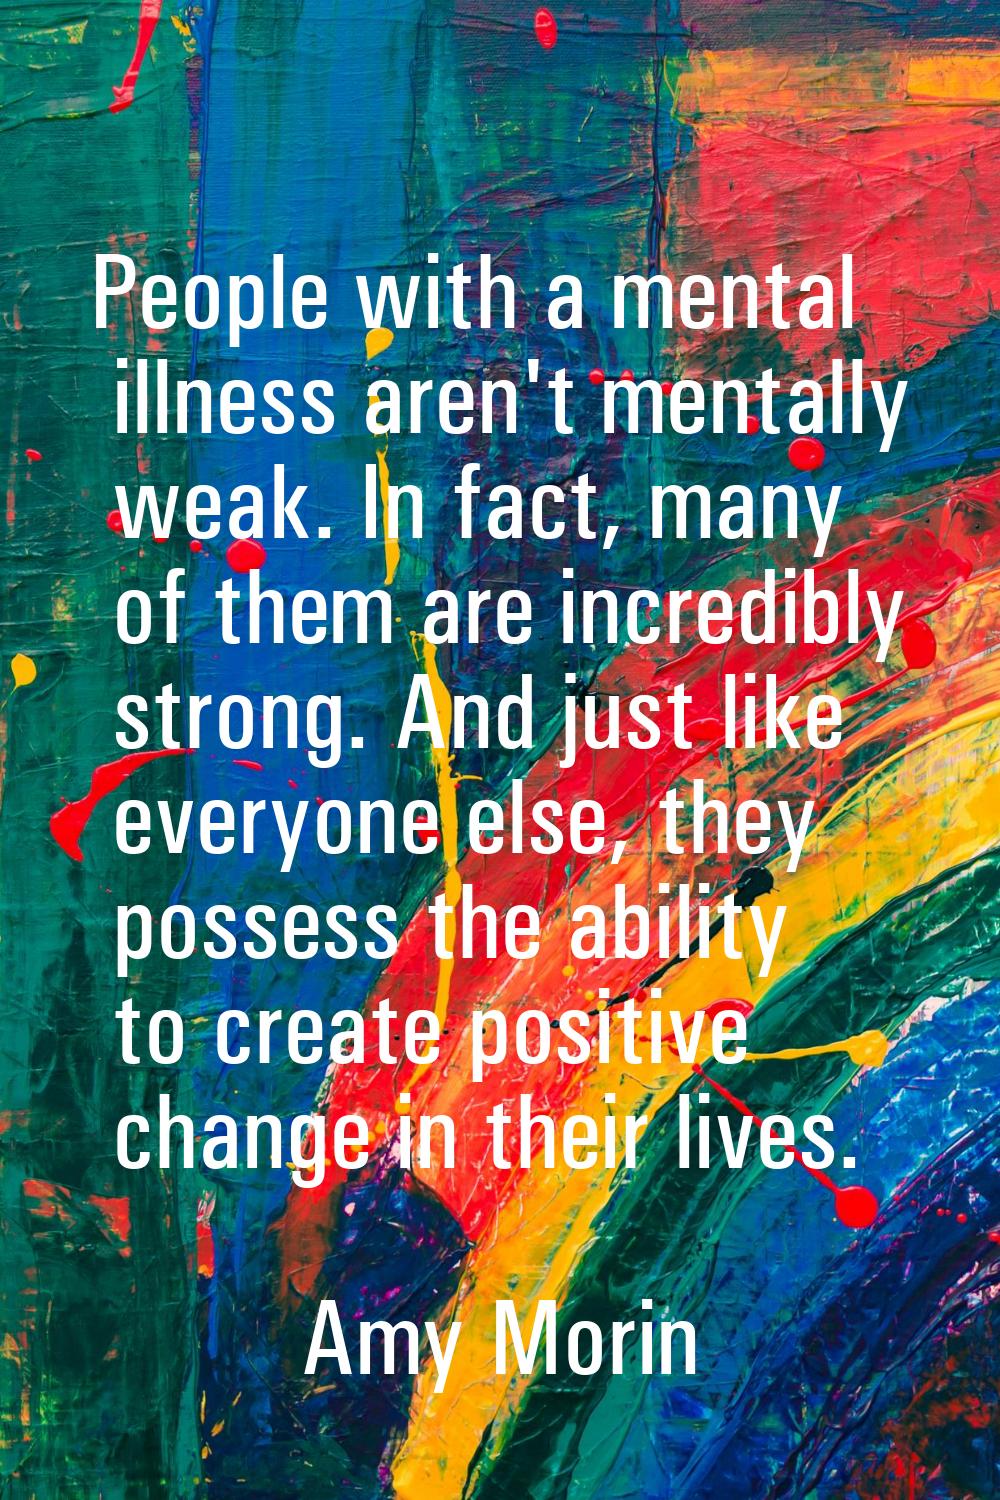 People with a mental illness aren't mentally weak. In fact, many of them are incredibly strong. And